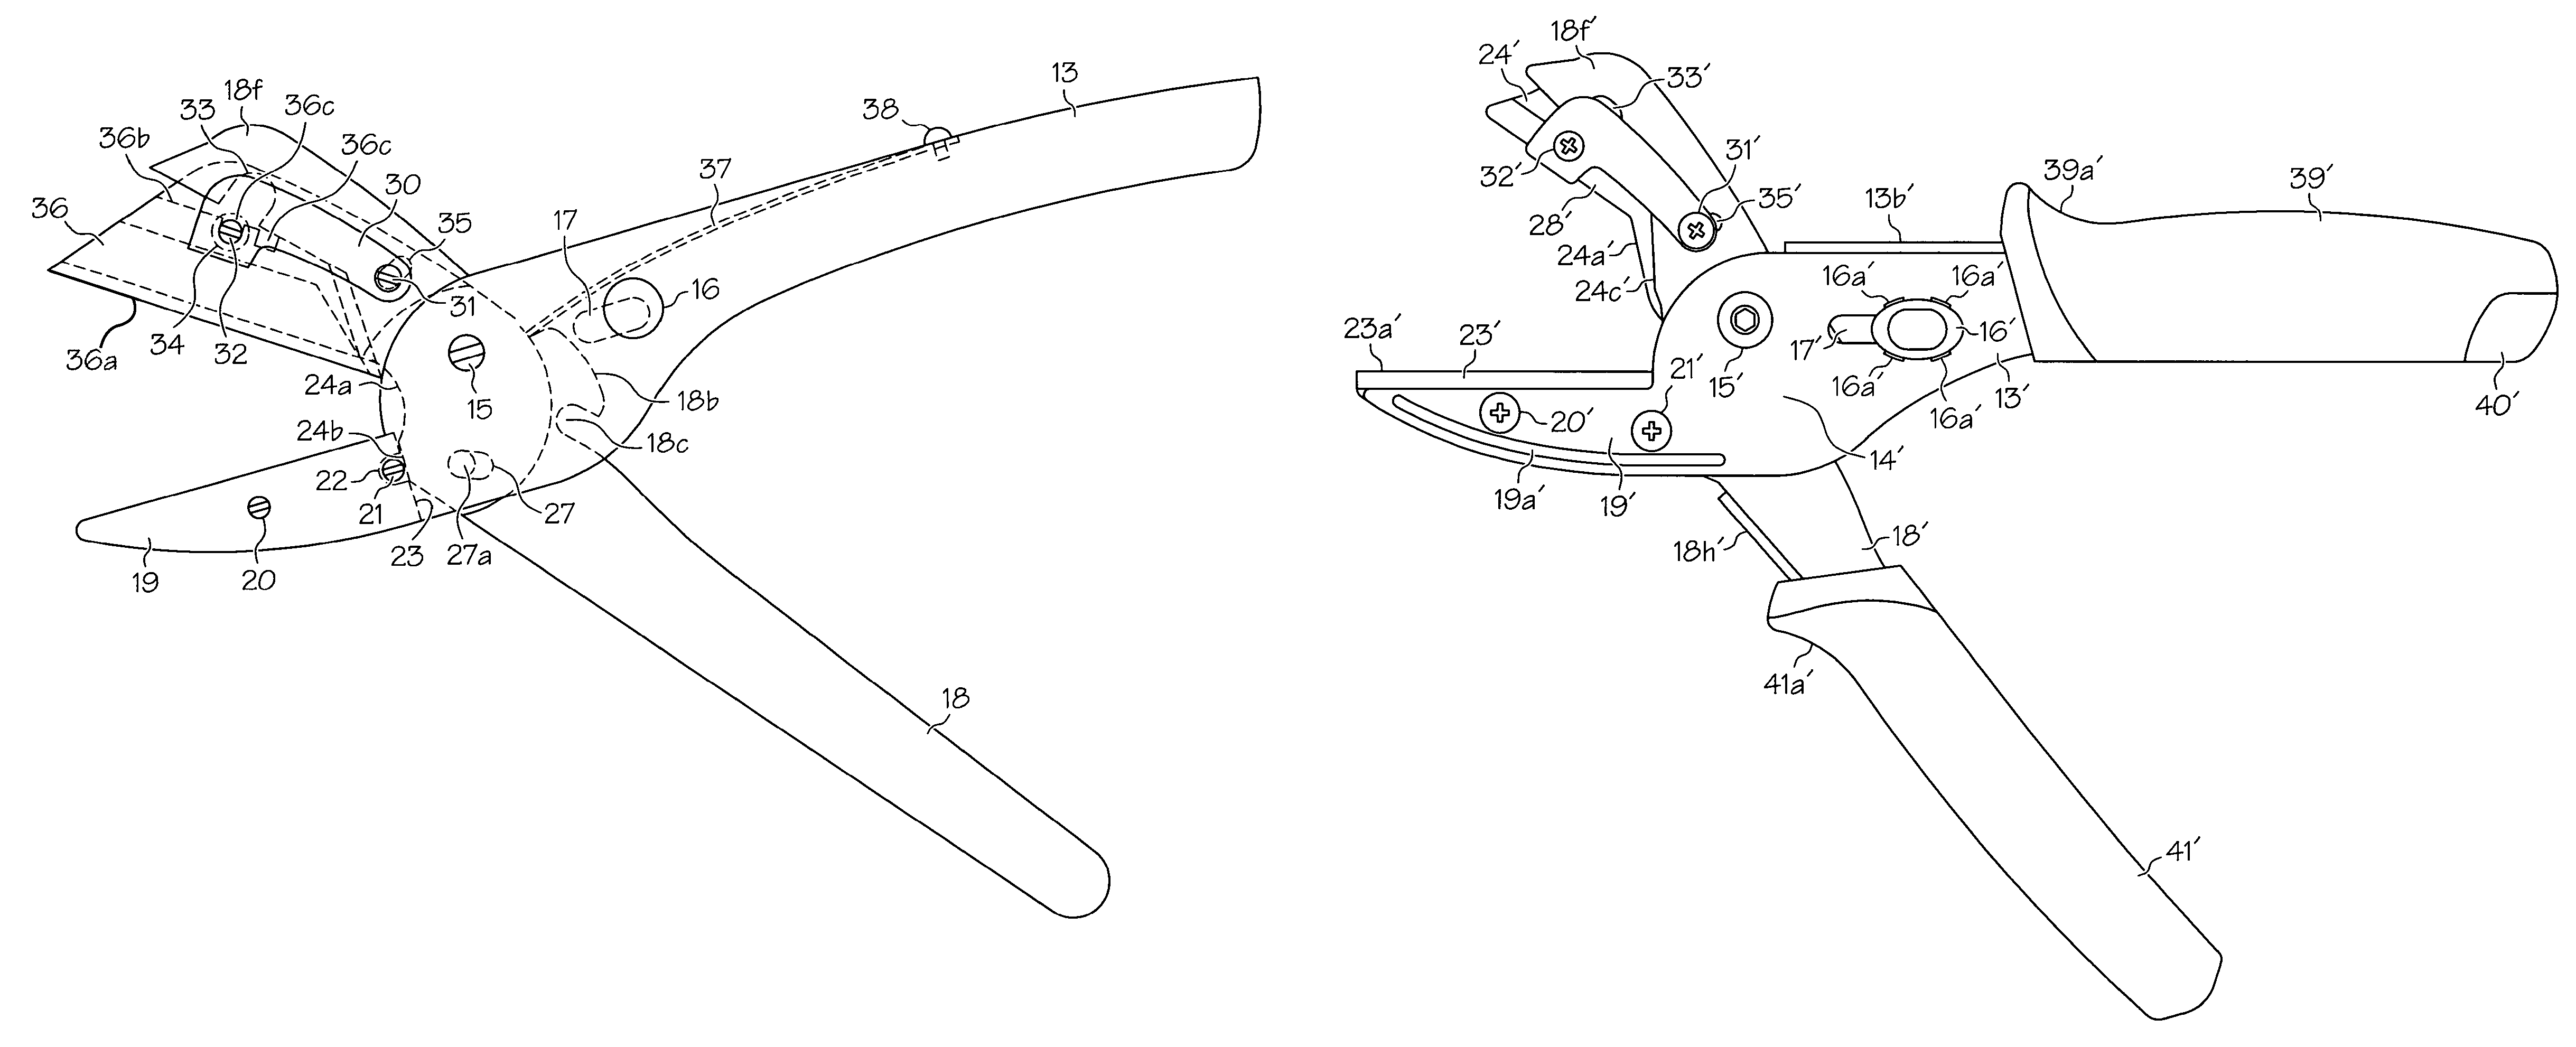 Utility cutter with a non-tool blade changer